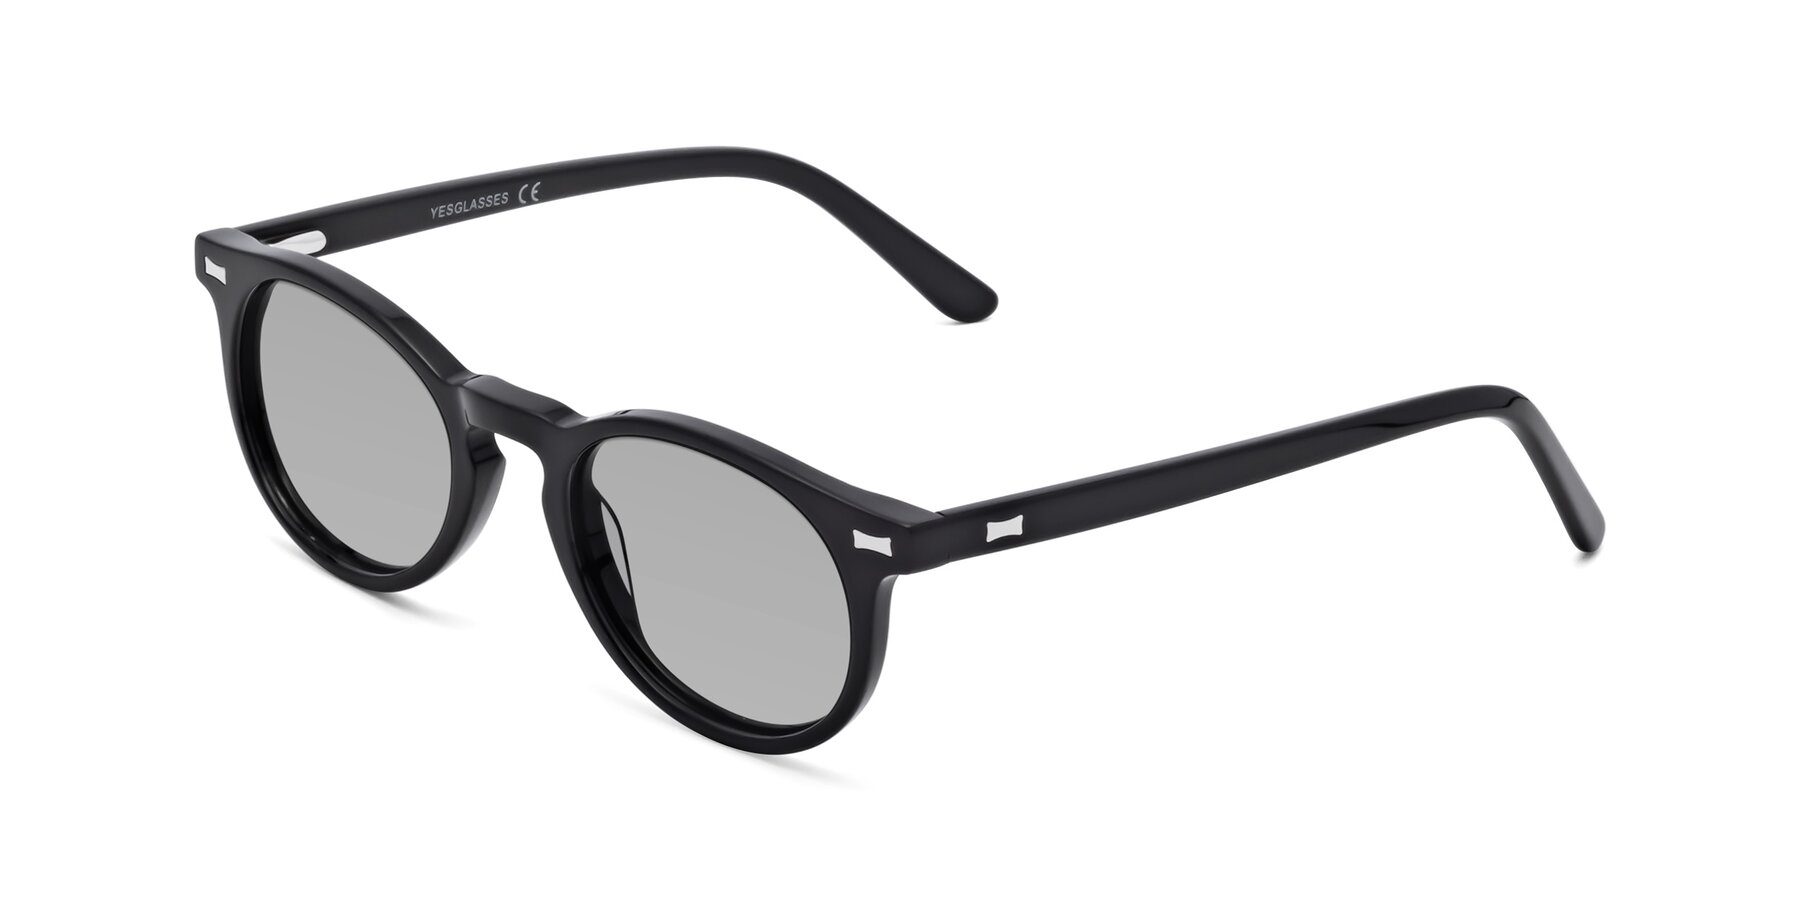 Angle of 17330 in Black with Light Gray Tinted Lenses